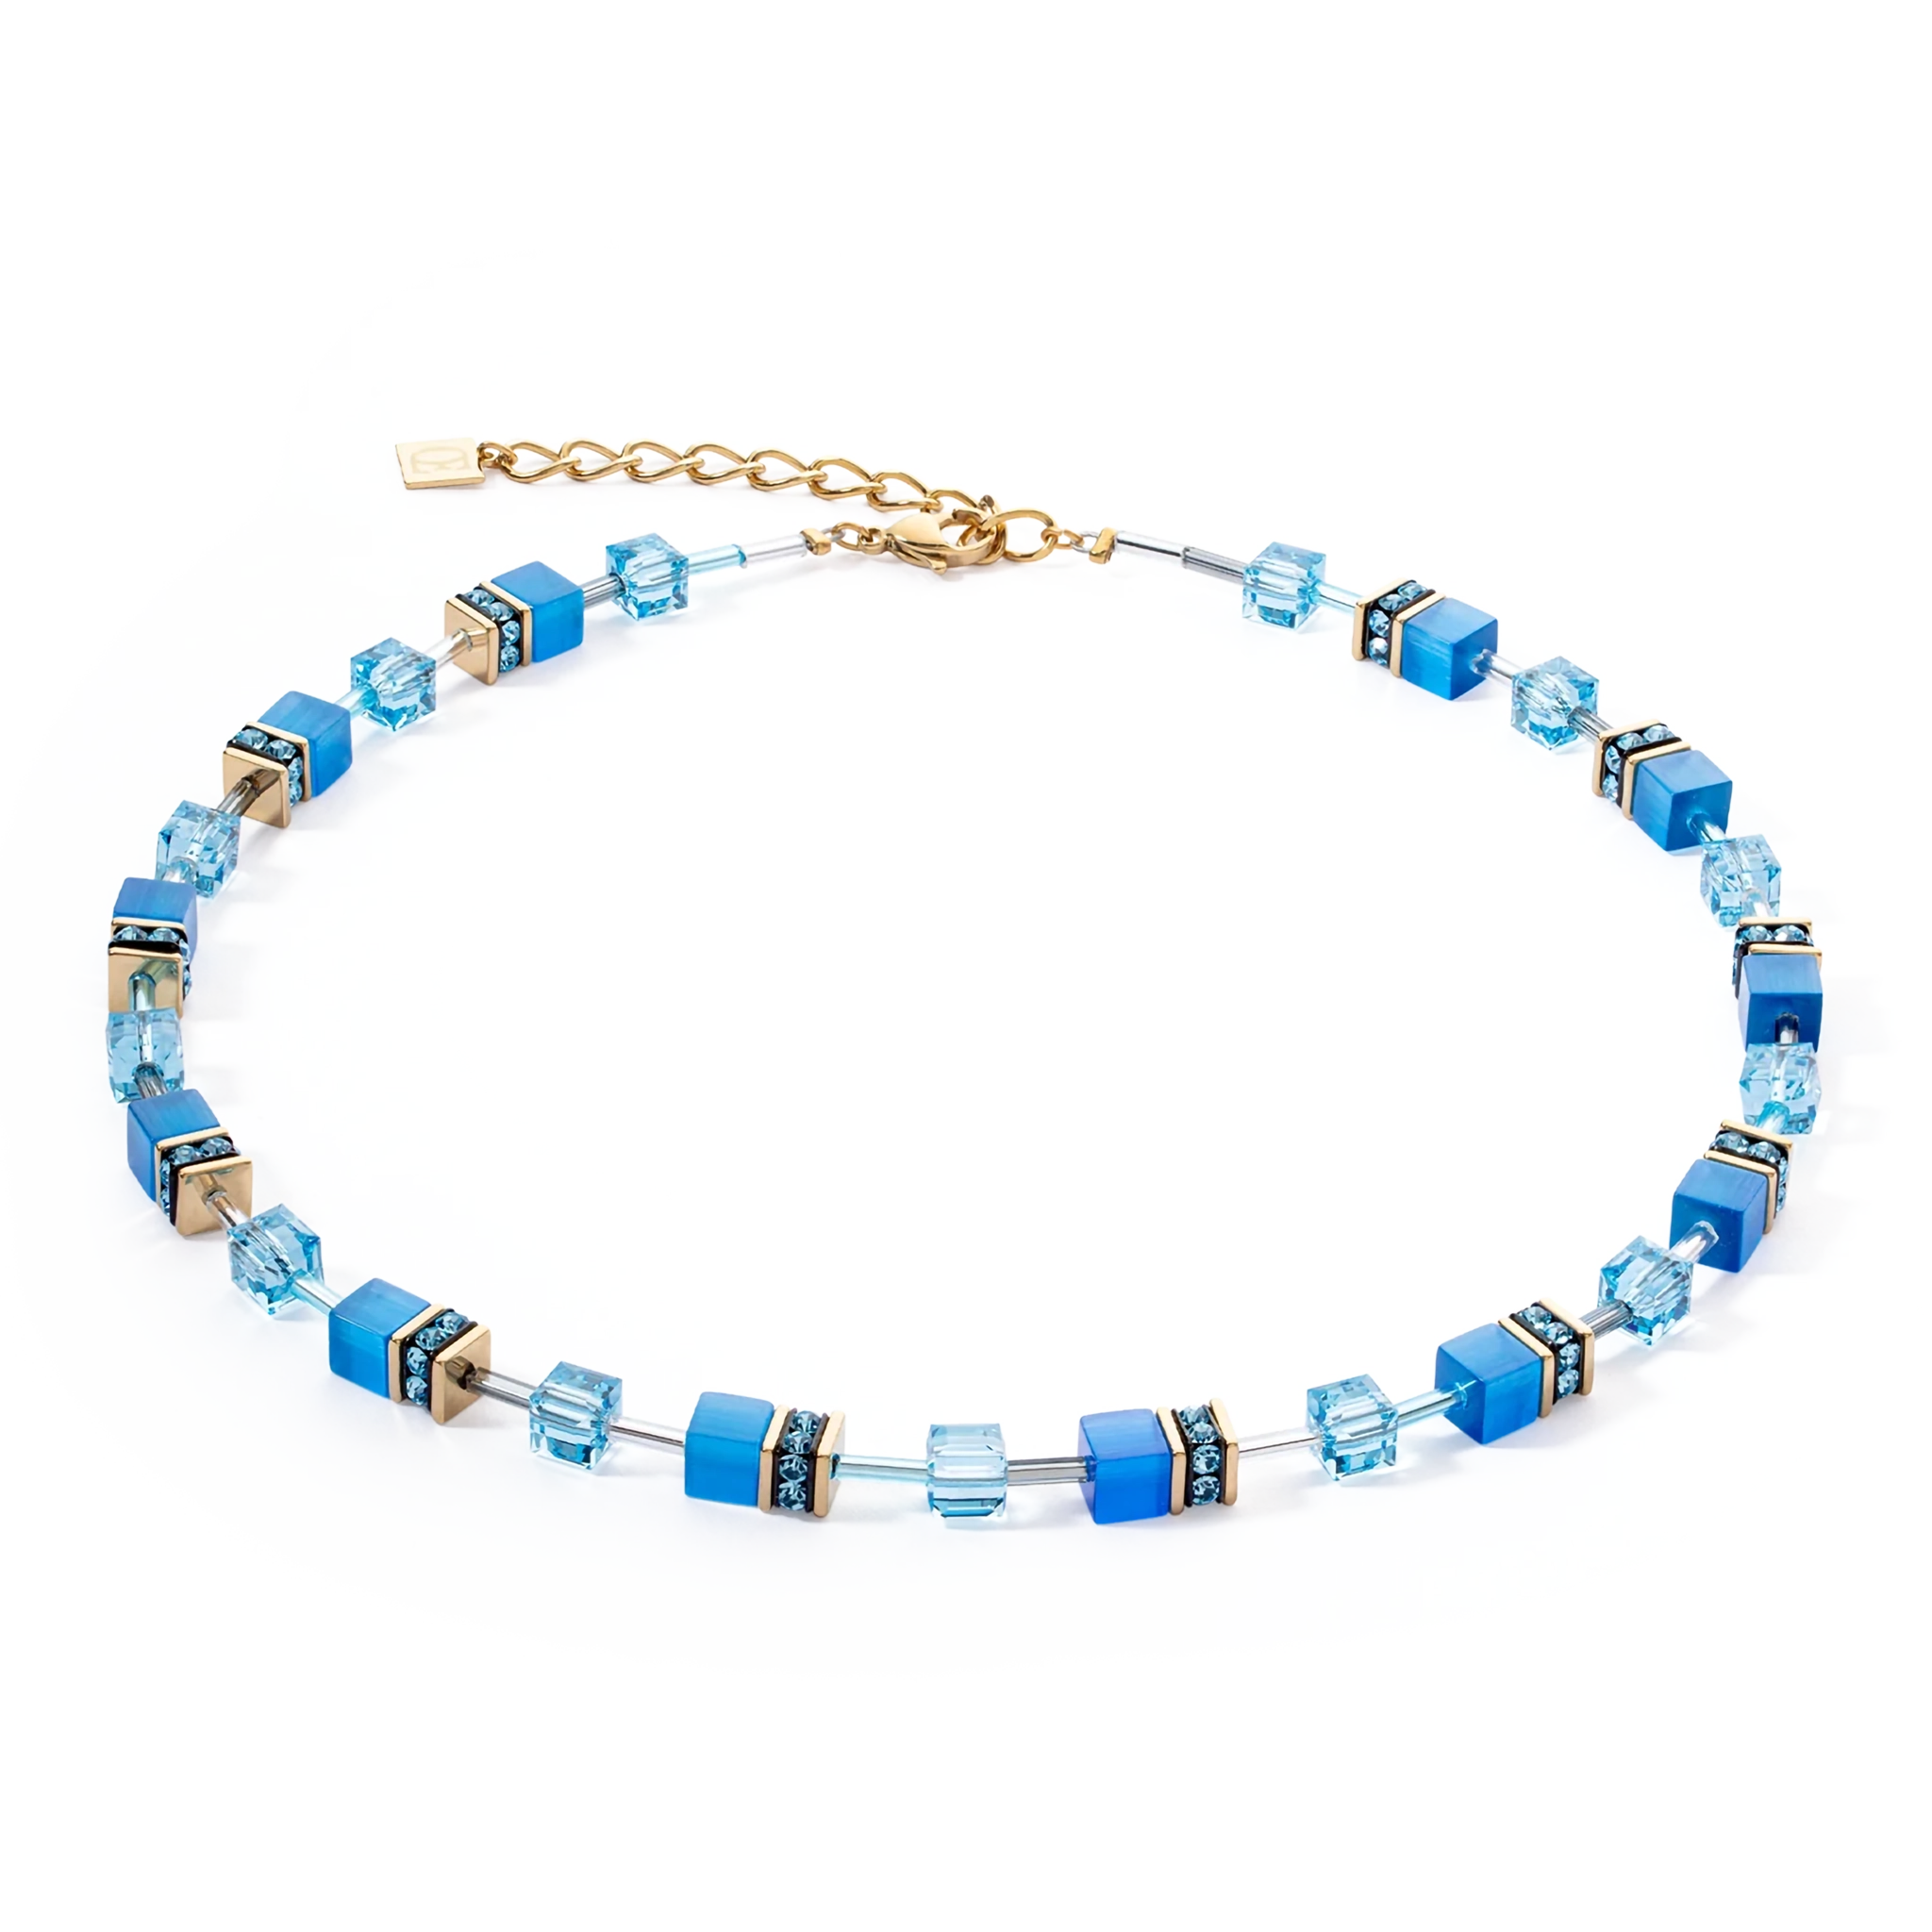 A gold steel necklace featuring cube stones and glass beads in blue